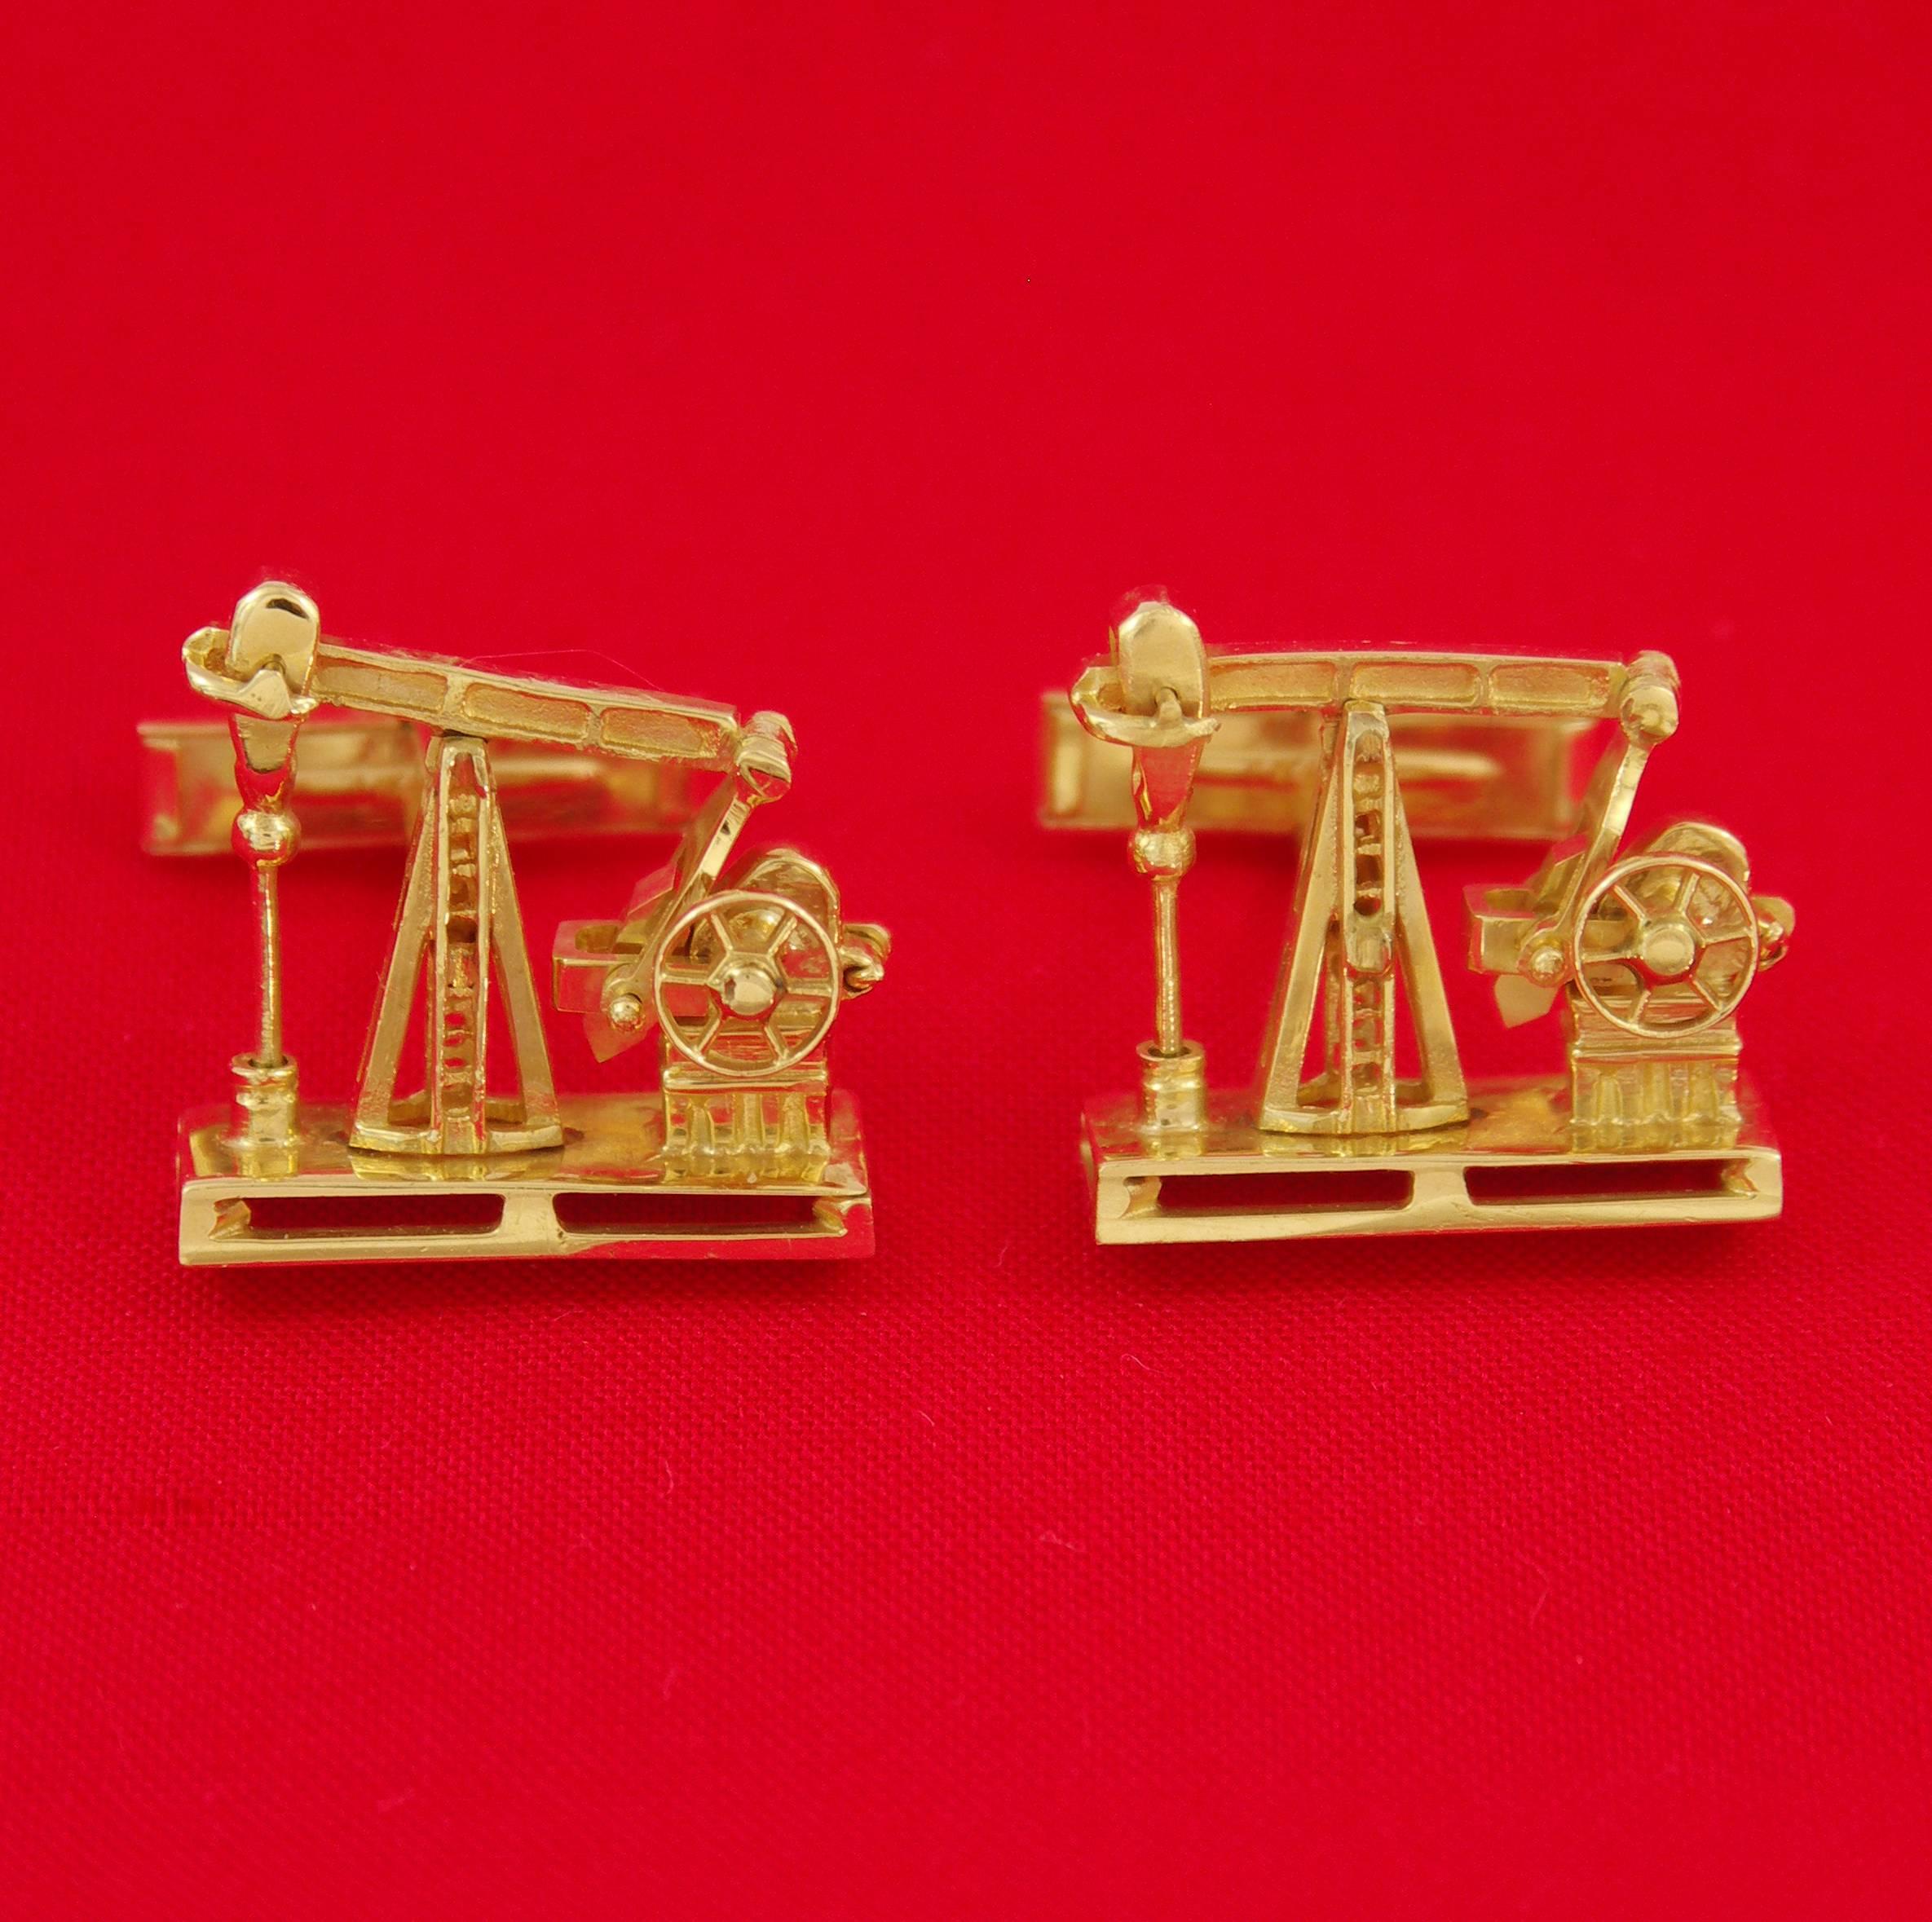 A pair of oil derrick cuff-links in 14K yellow gold with moveable 